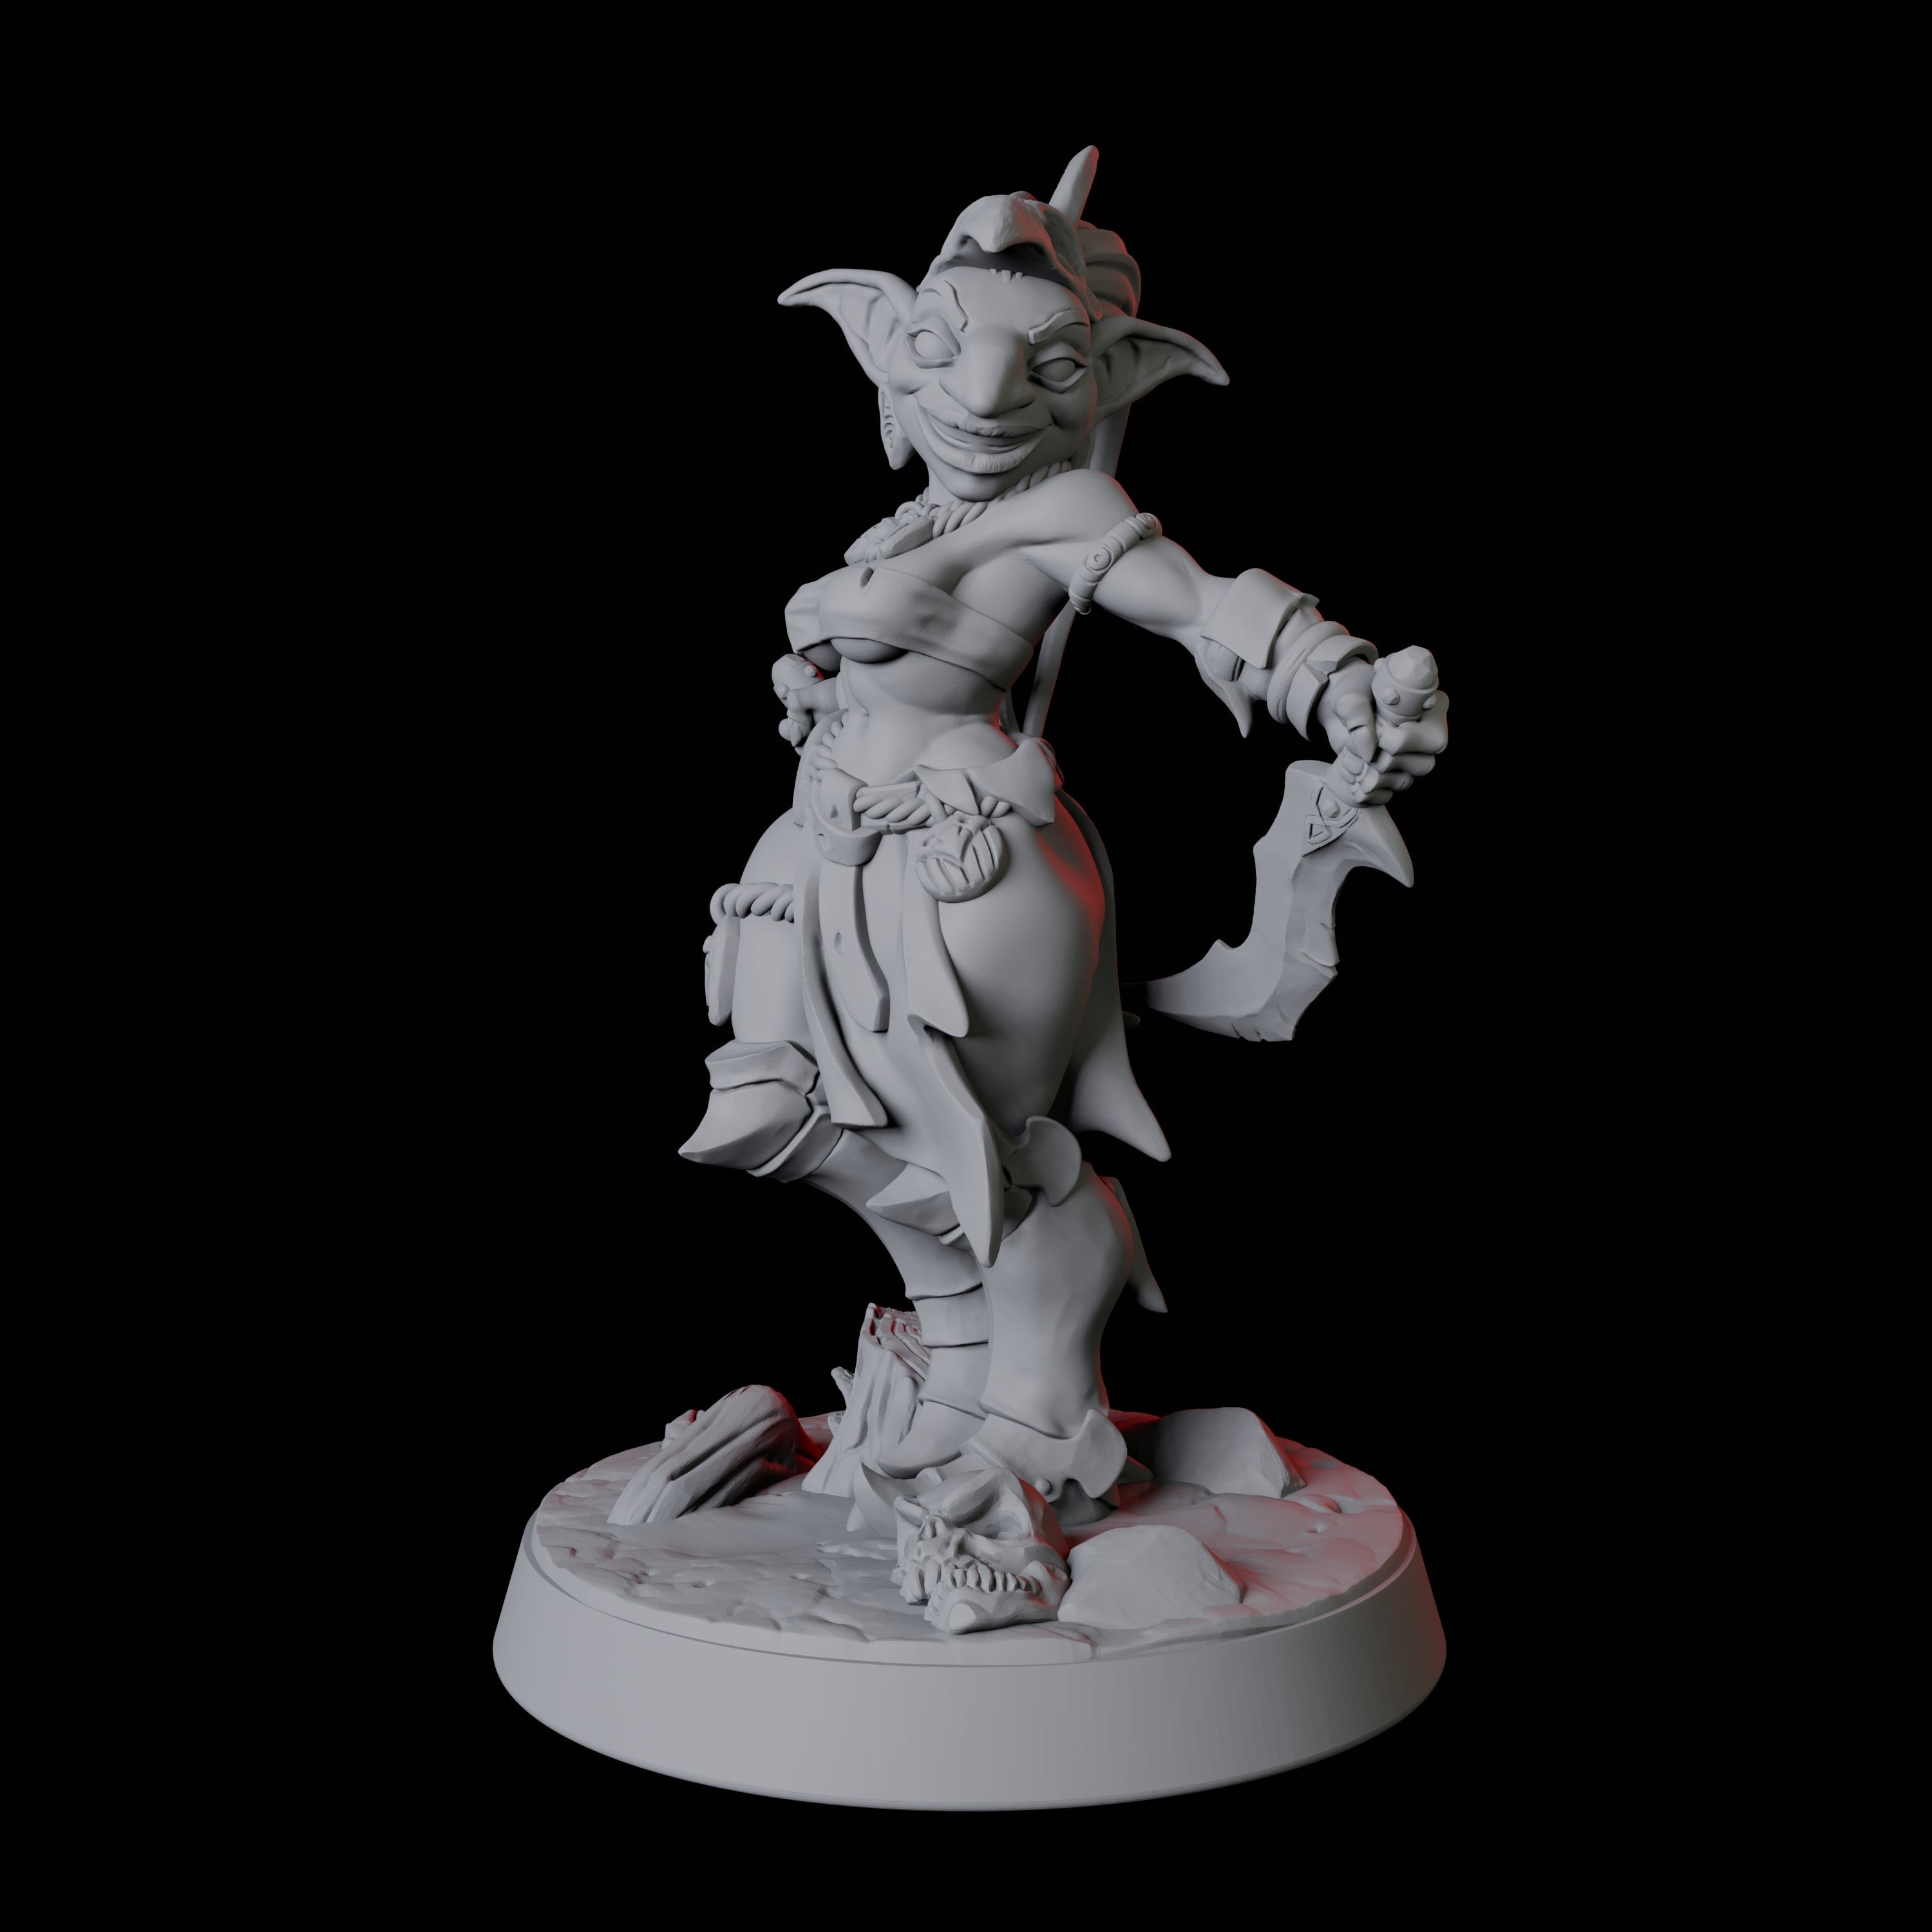 Dancing Goblin Pinup Miniature for Dungeons and Dragons, Pathfinder or other TTRPGs